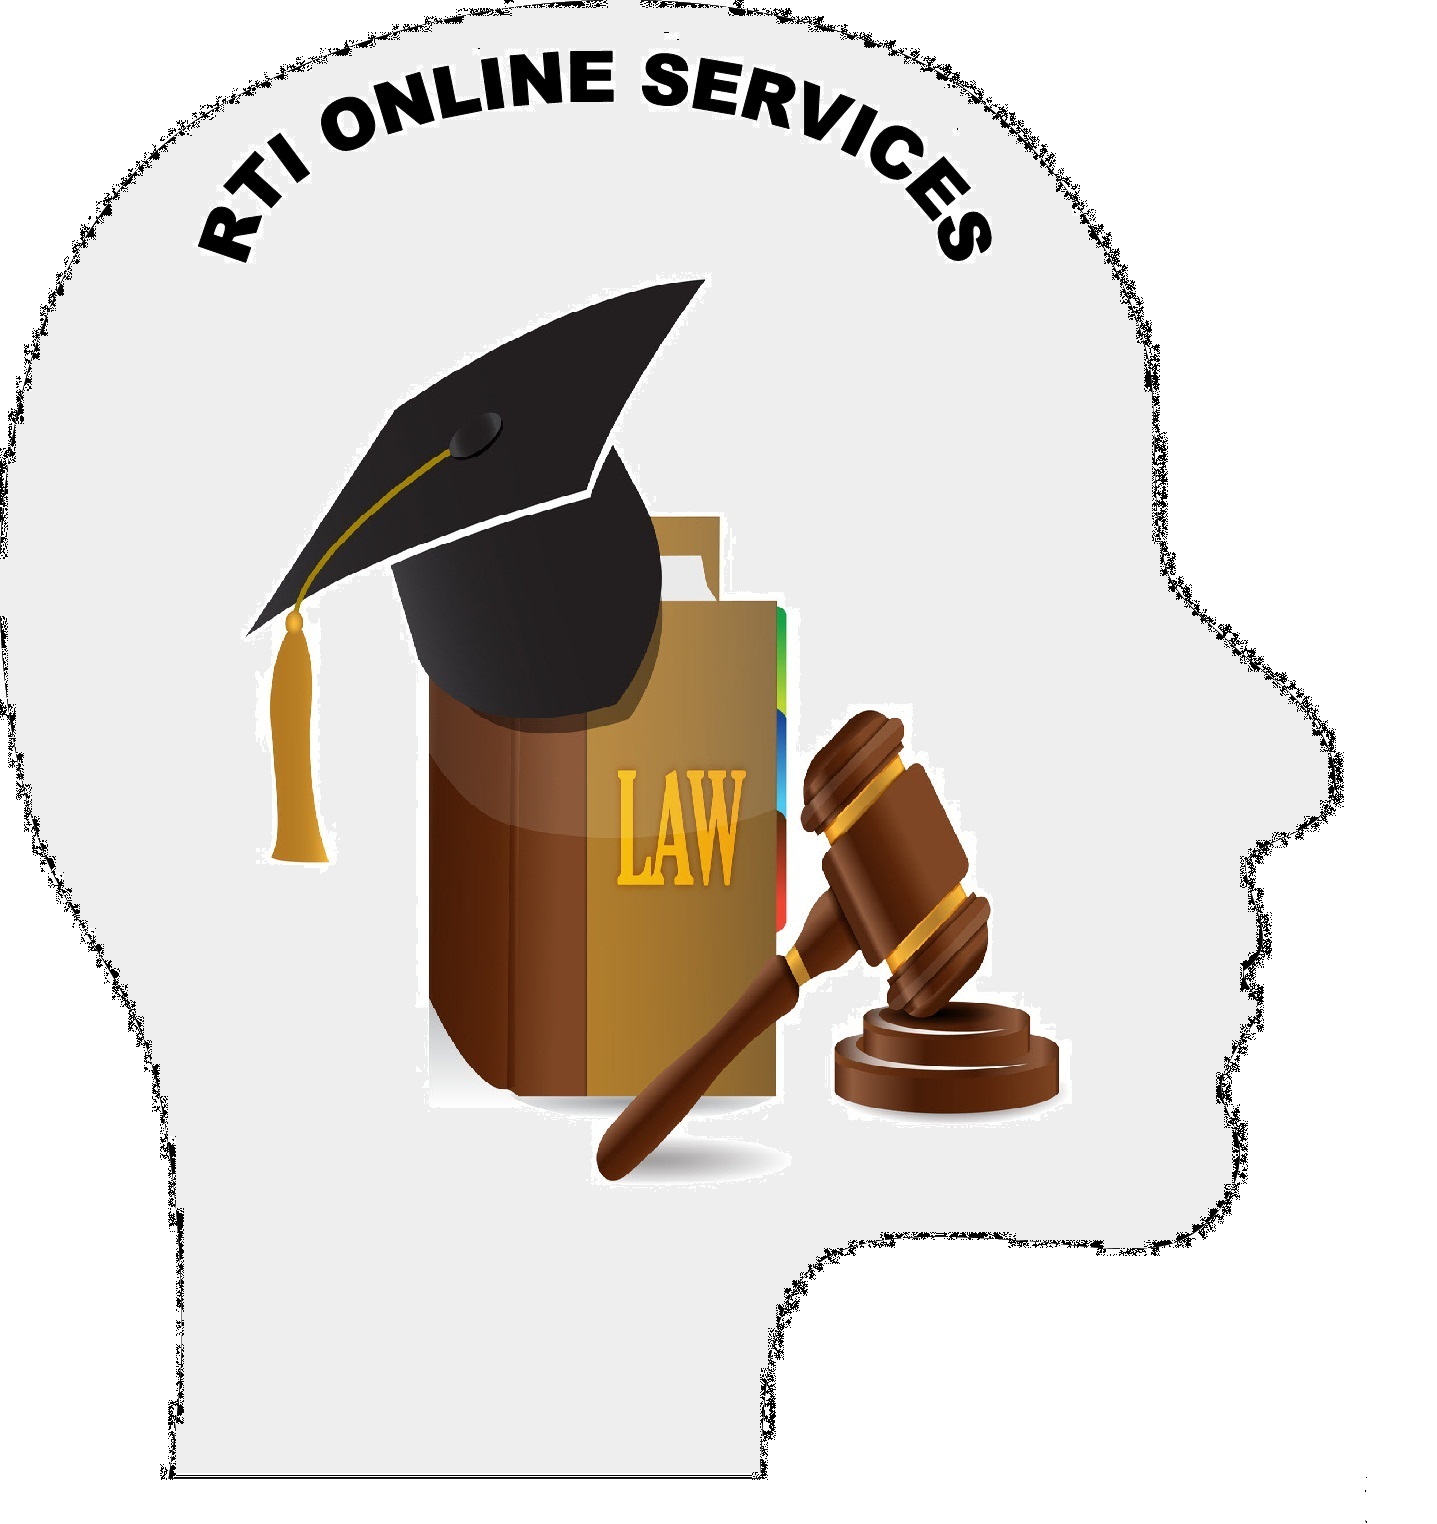 RTI ONLINE SERVICES|IT Services|Professional Services